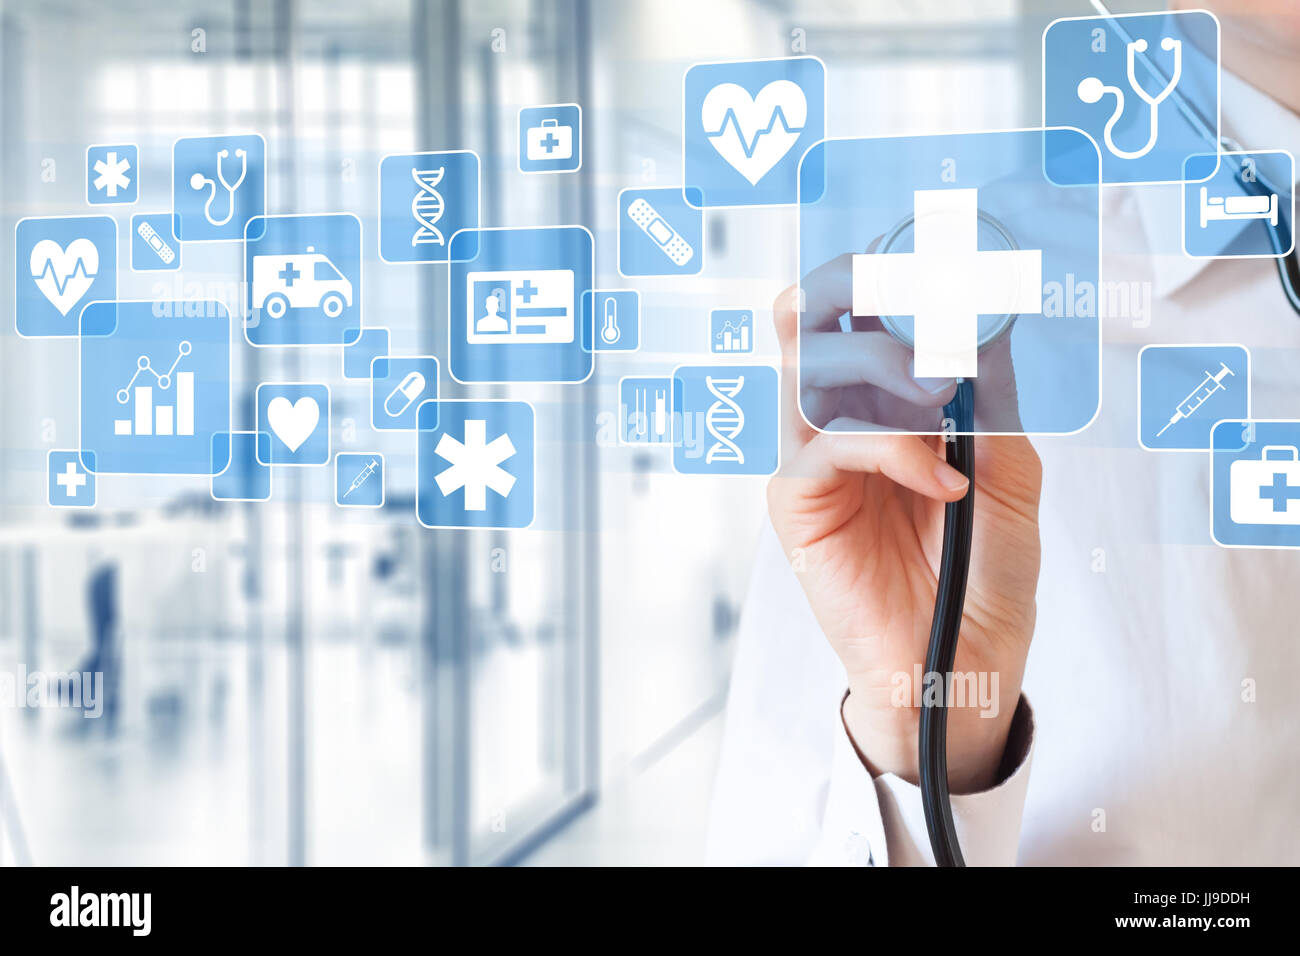 Female medical doctor hand holding stethoscope touching icons about health care services on virtual screen with hospital interior in background Stock Photo